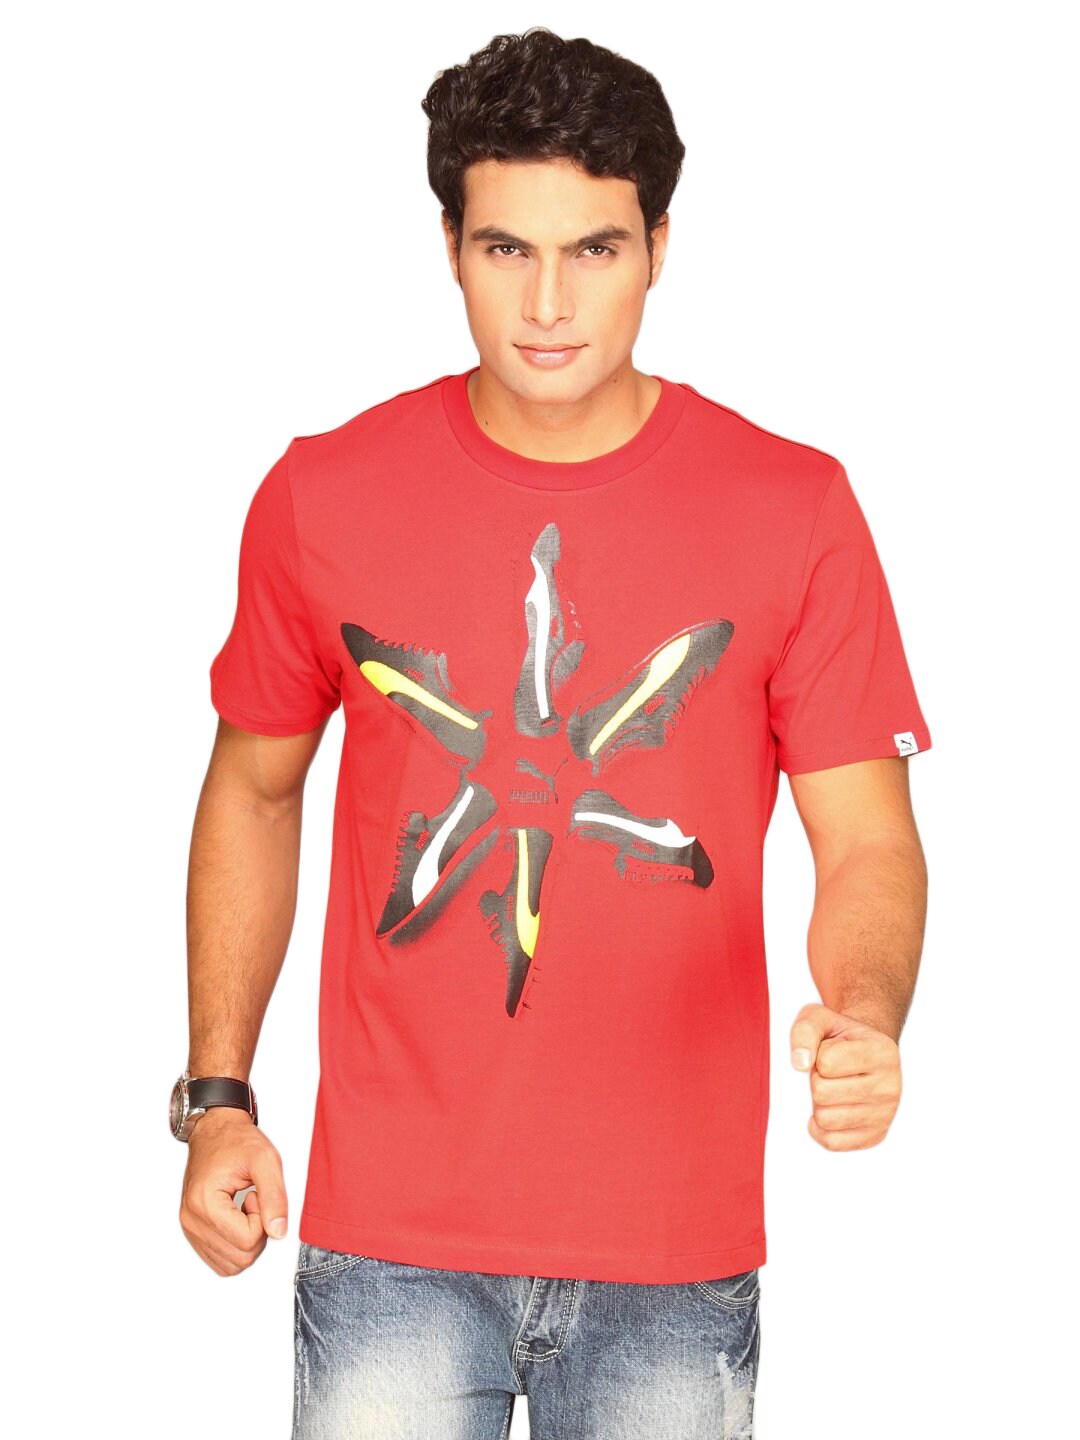 Puma Men's Heroes Graphic Red T-shirt